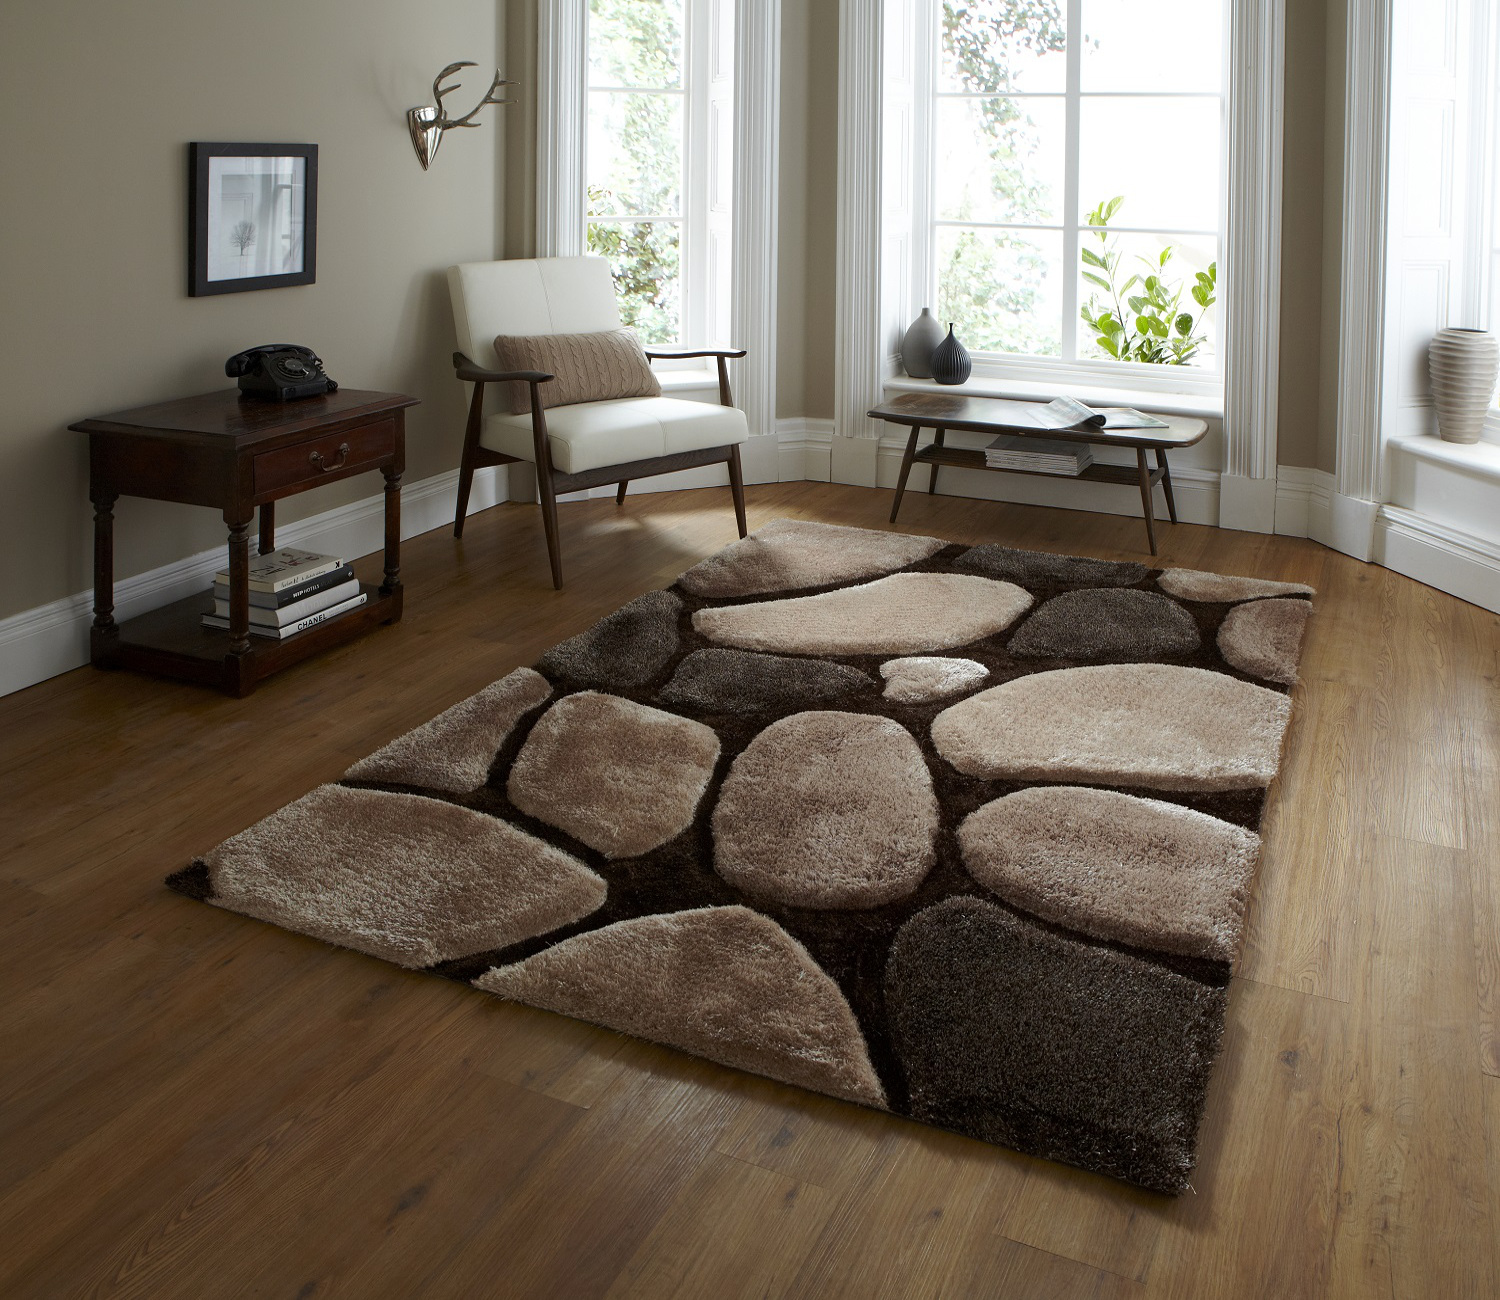 Large floor rugs hand tufted super soft pebble effect rug le house gy pile AUZIIHY